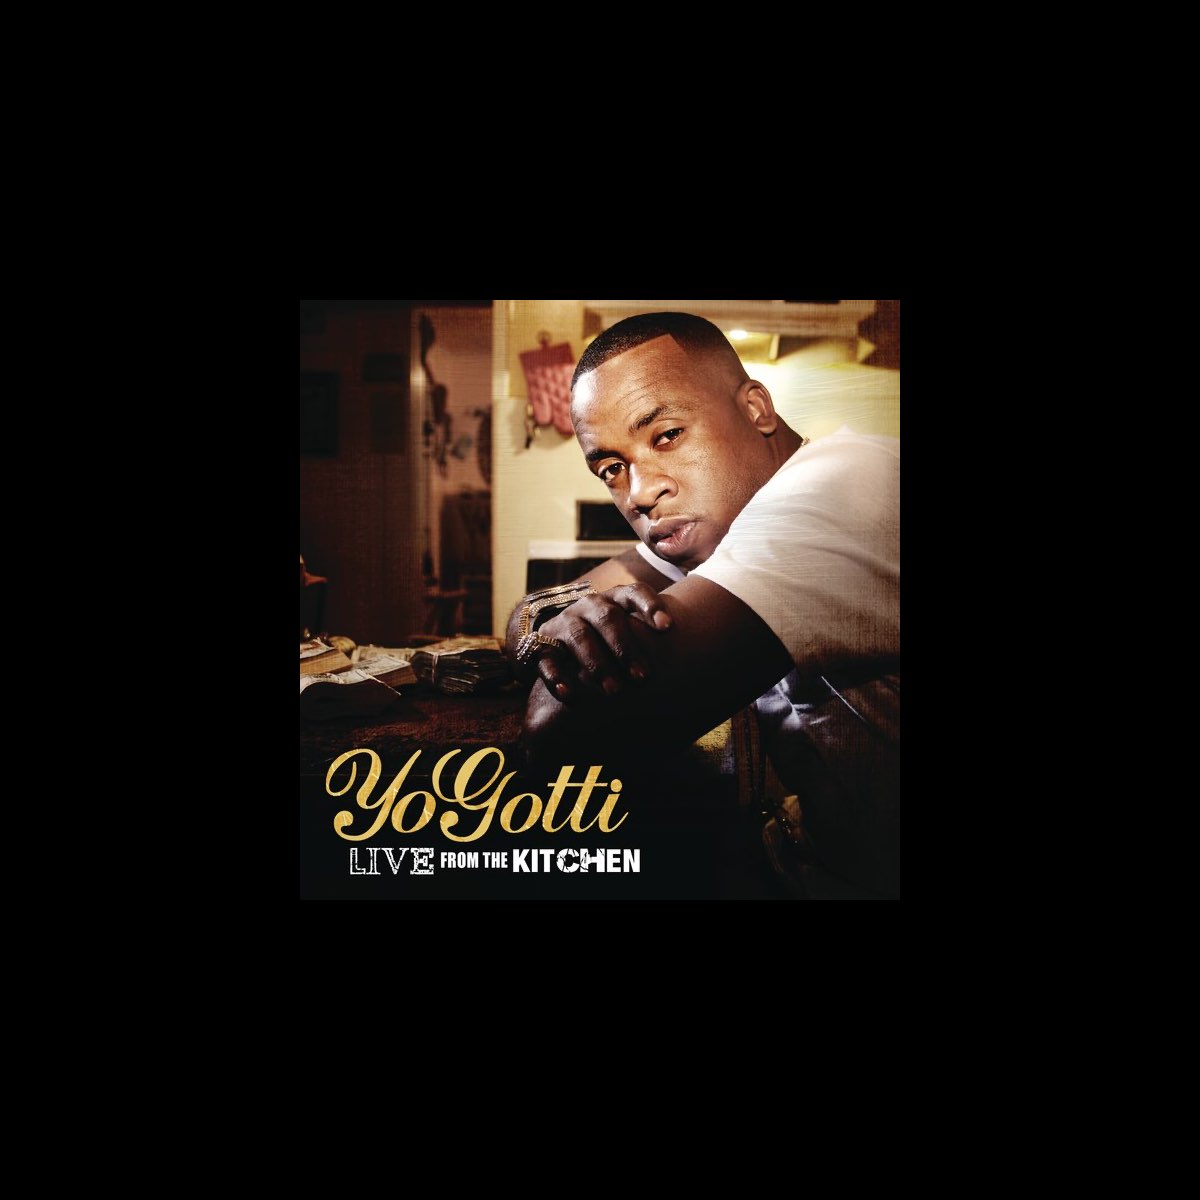 Live from the Kitchen by Yo Gotti on Apple Music